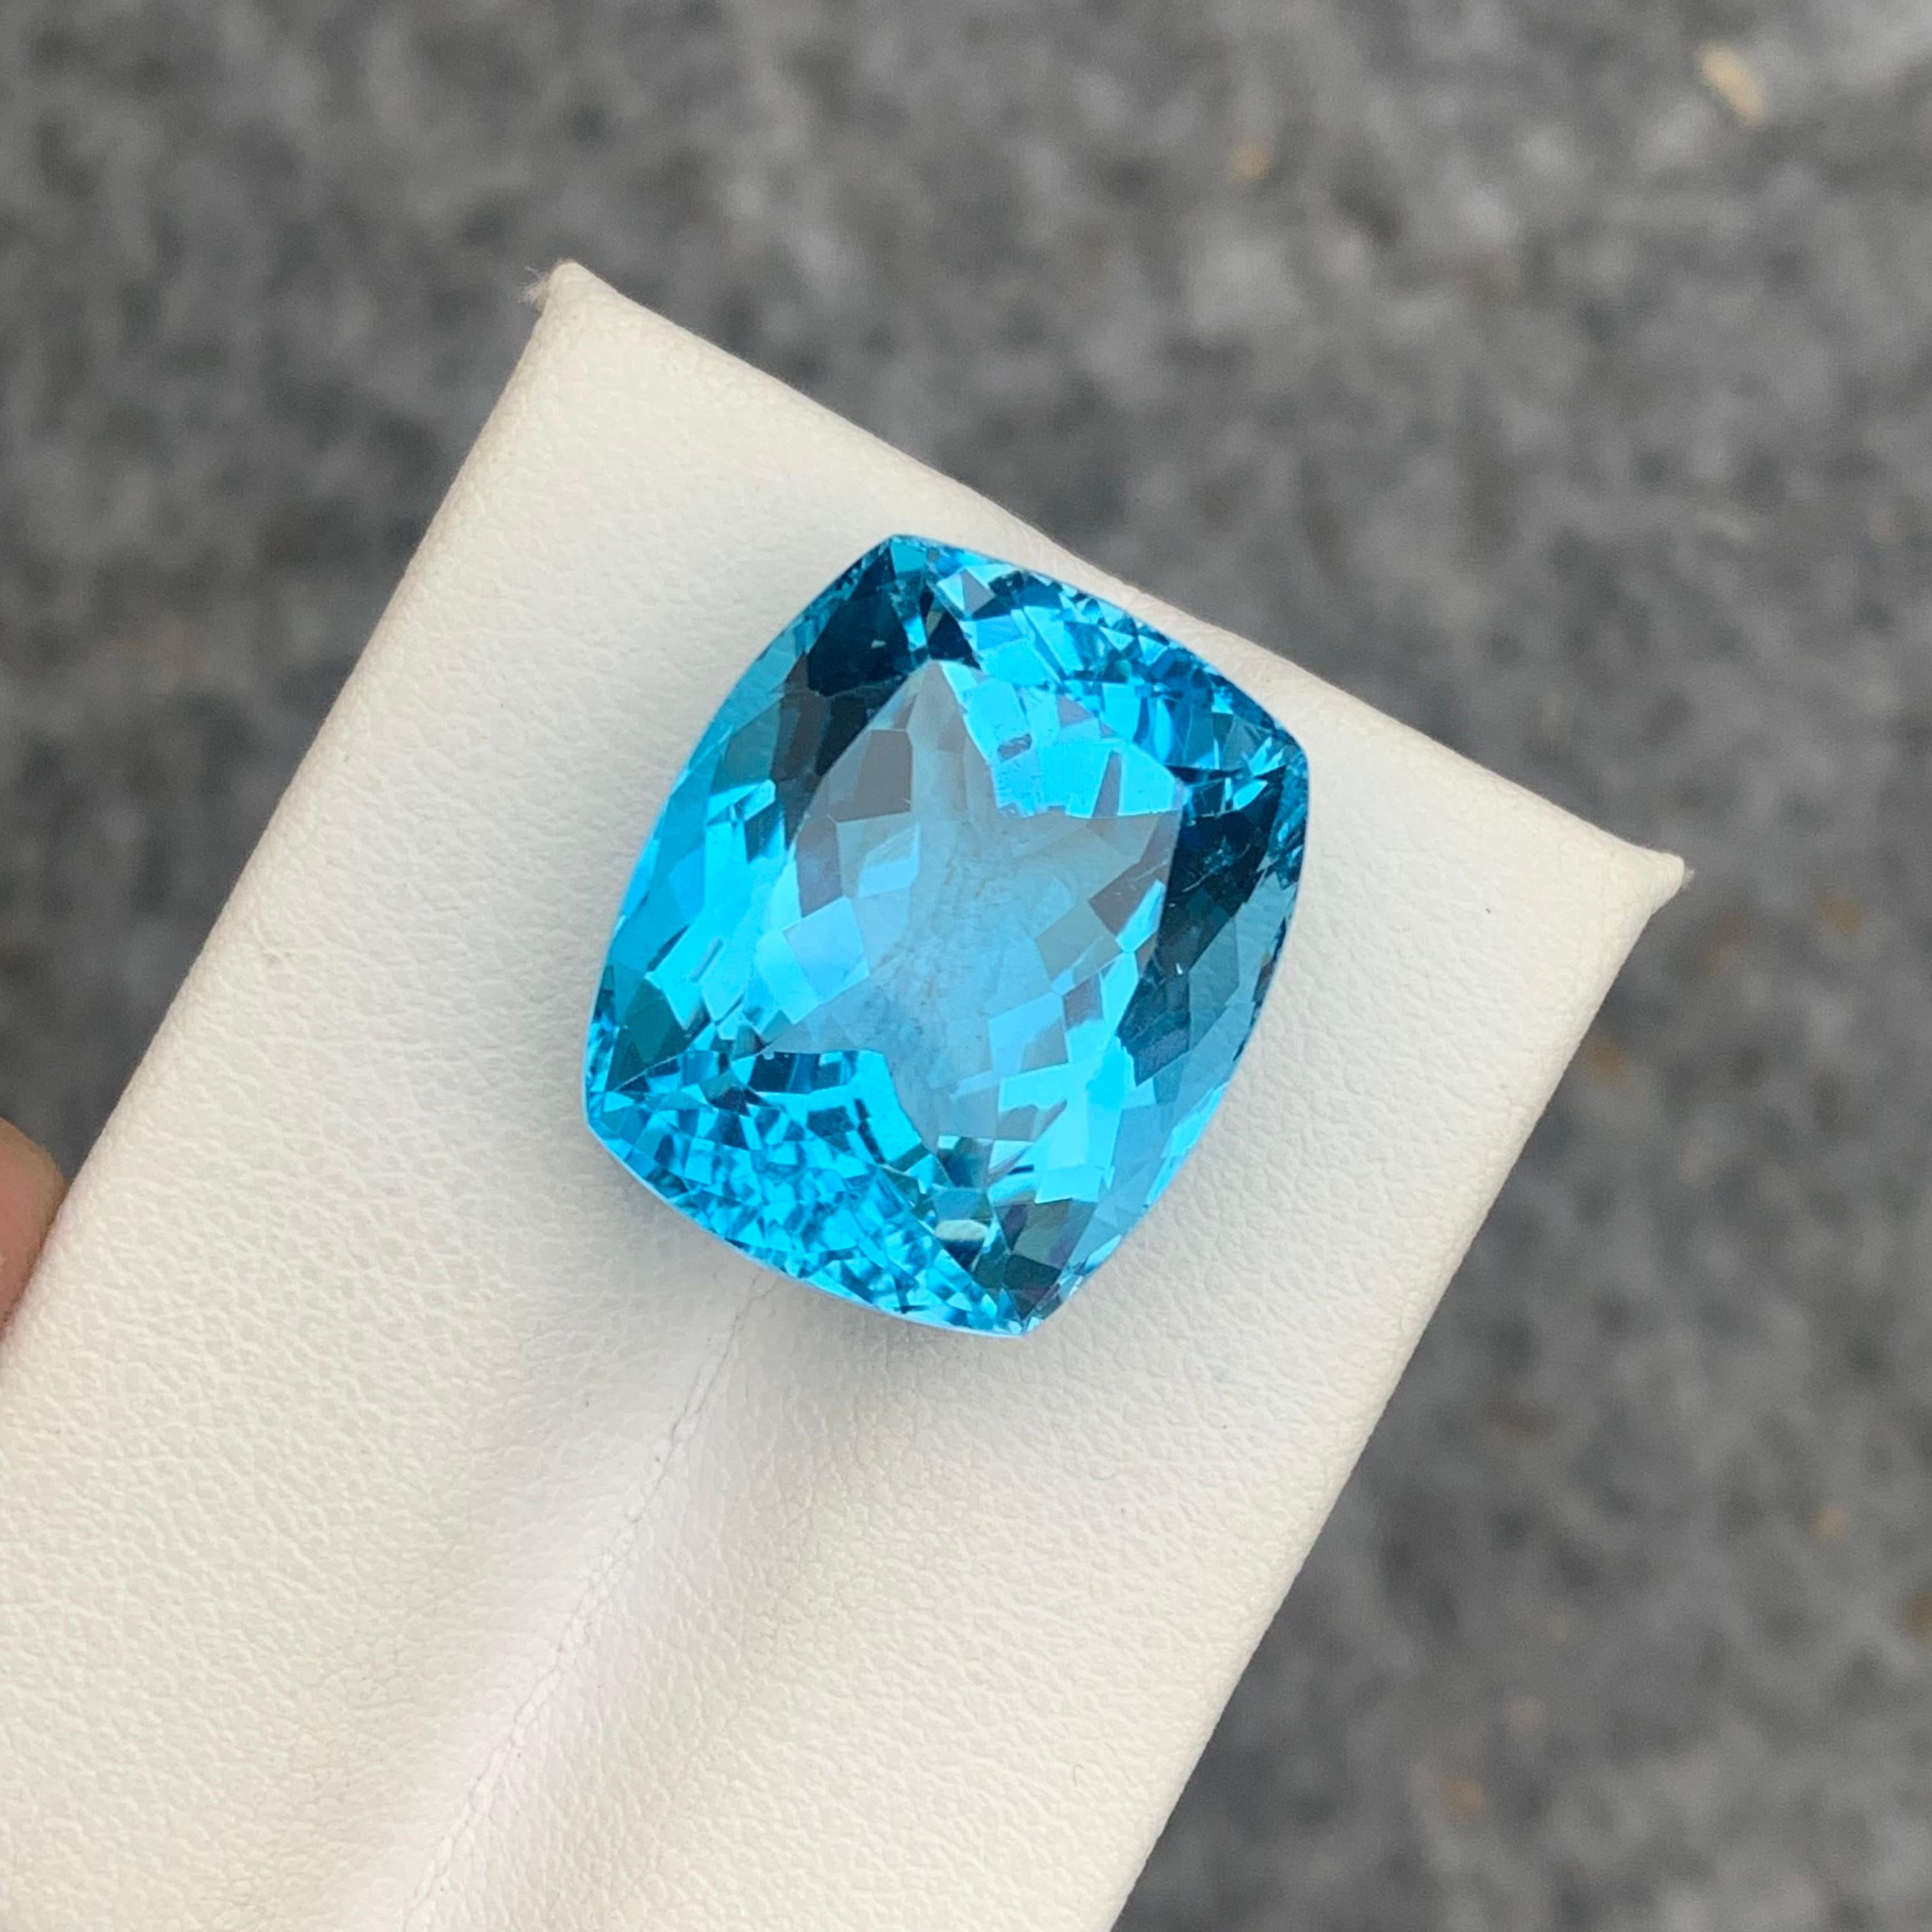 Gorgeous 31.10 Carat Loose Blue Topaz from Brazil Long Cushion Cut for Jewelry 10